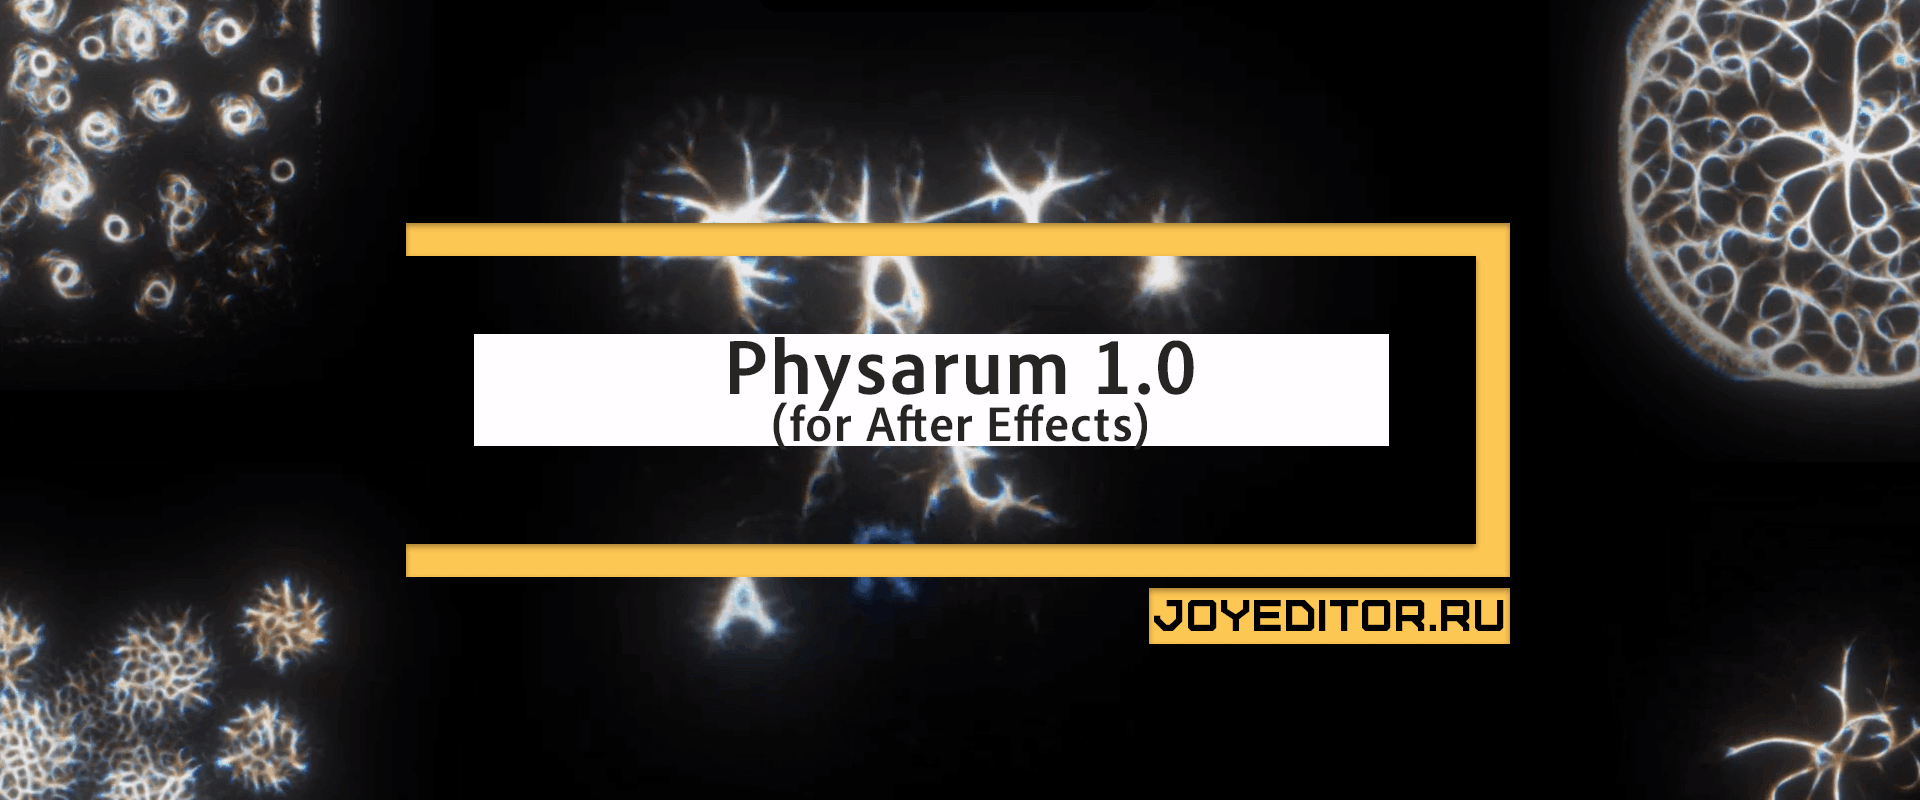 Physarum 1.0 (for After Effects)